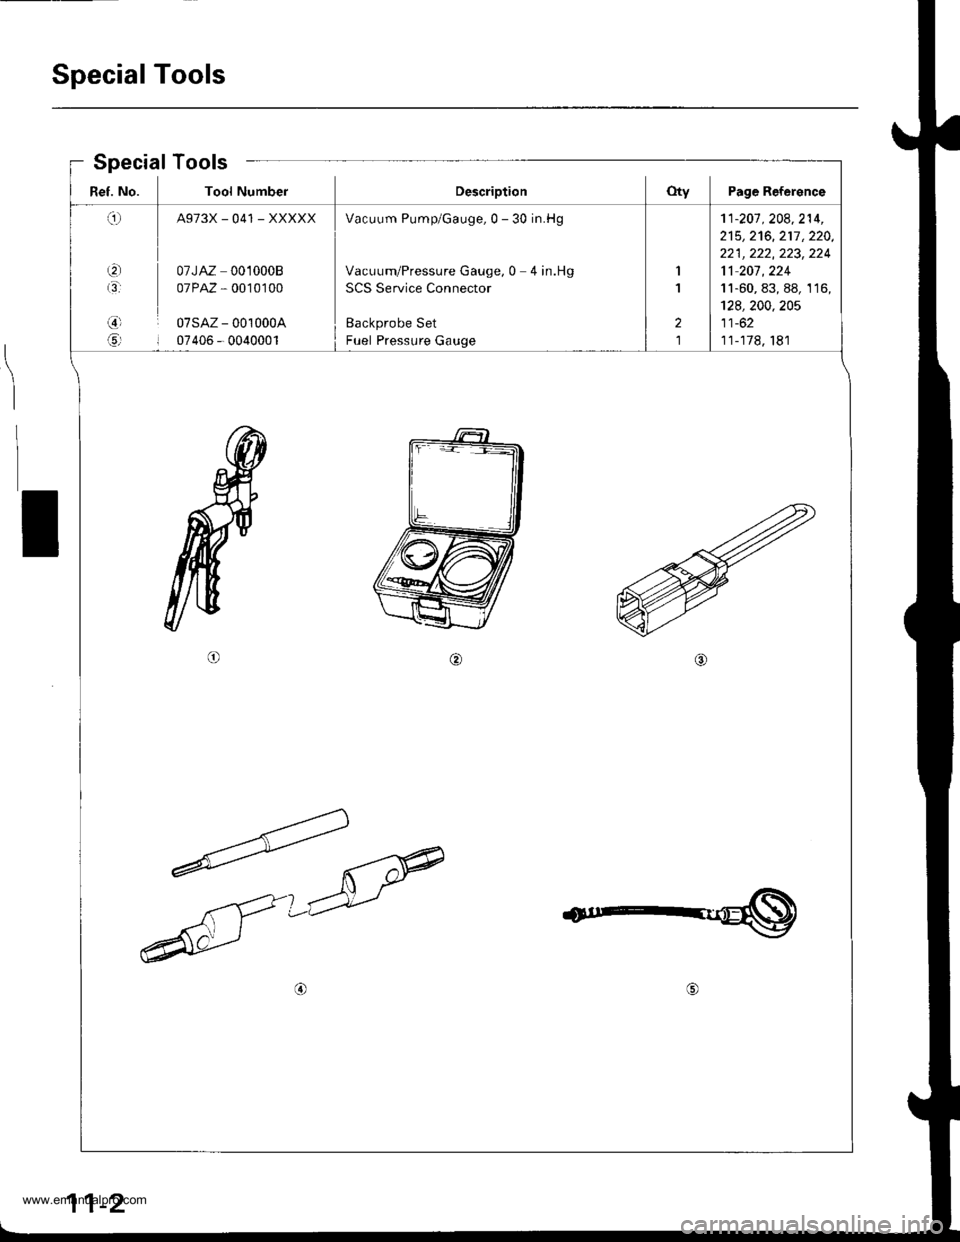 HONDA CR-V 2000 RD1-RD3 / 1.G Workshop Manual 
Special Tools
Ref. No. Tool NumberDescriptionOty Page Reference
q
t3
,3)l
6rl
A973X_041 _XXXXX
07JAZ 0010008
07PAZ , 0010100
07sAz - 001000A
07405 - 0040001
Vacuum Pump/Gauge,0 - 30 in.Hg
Vacuum/Pre